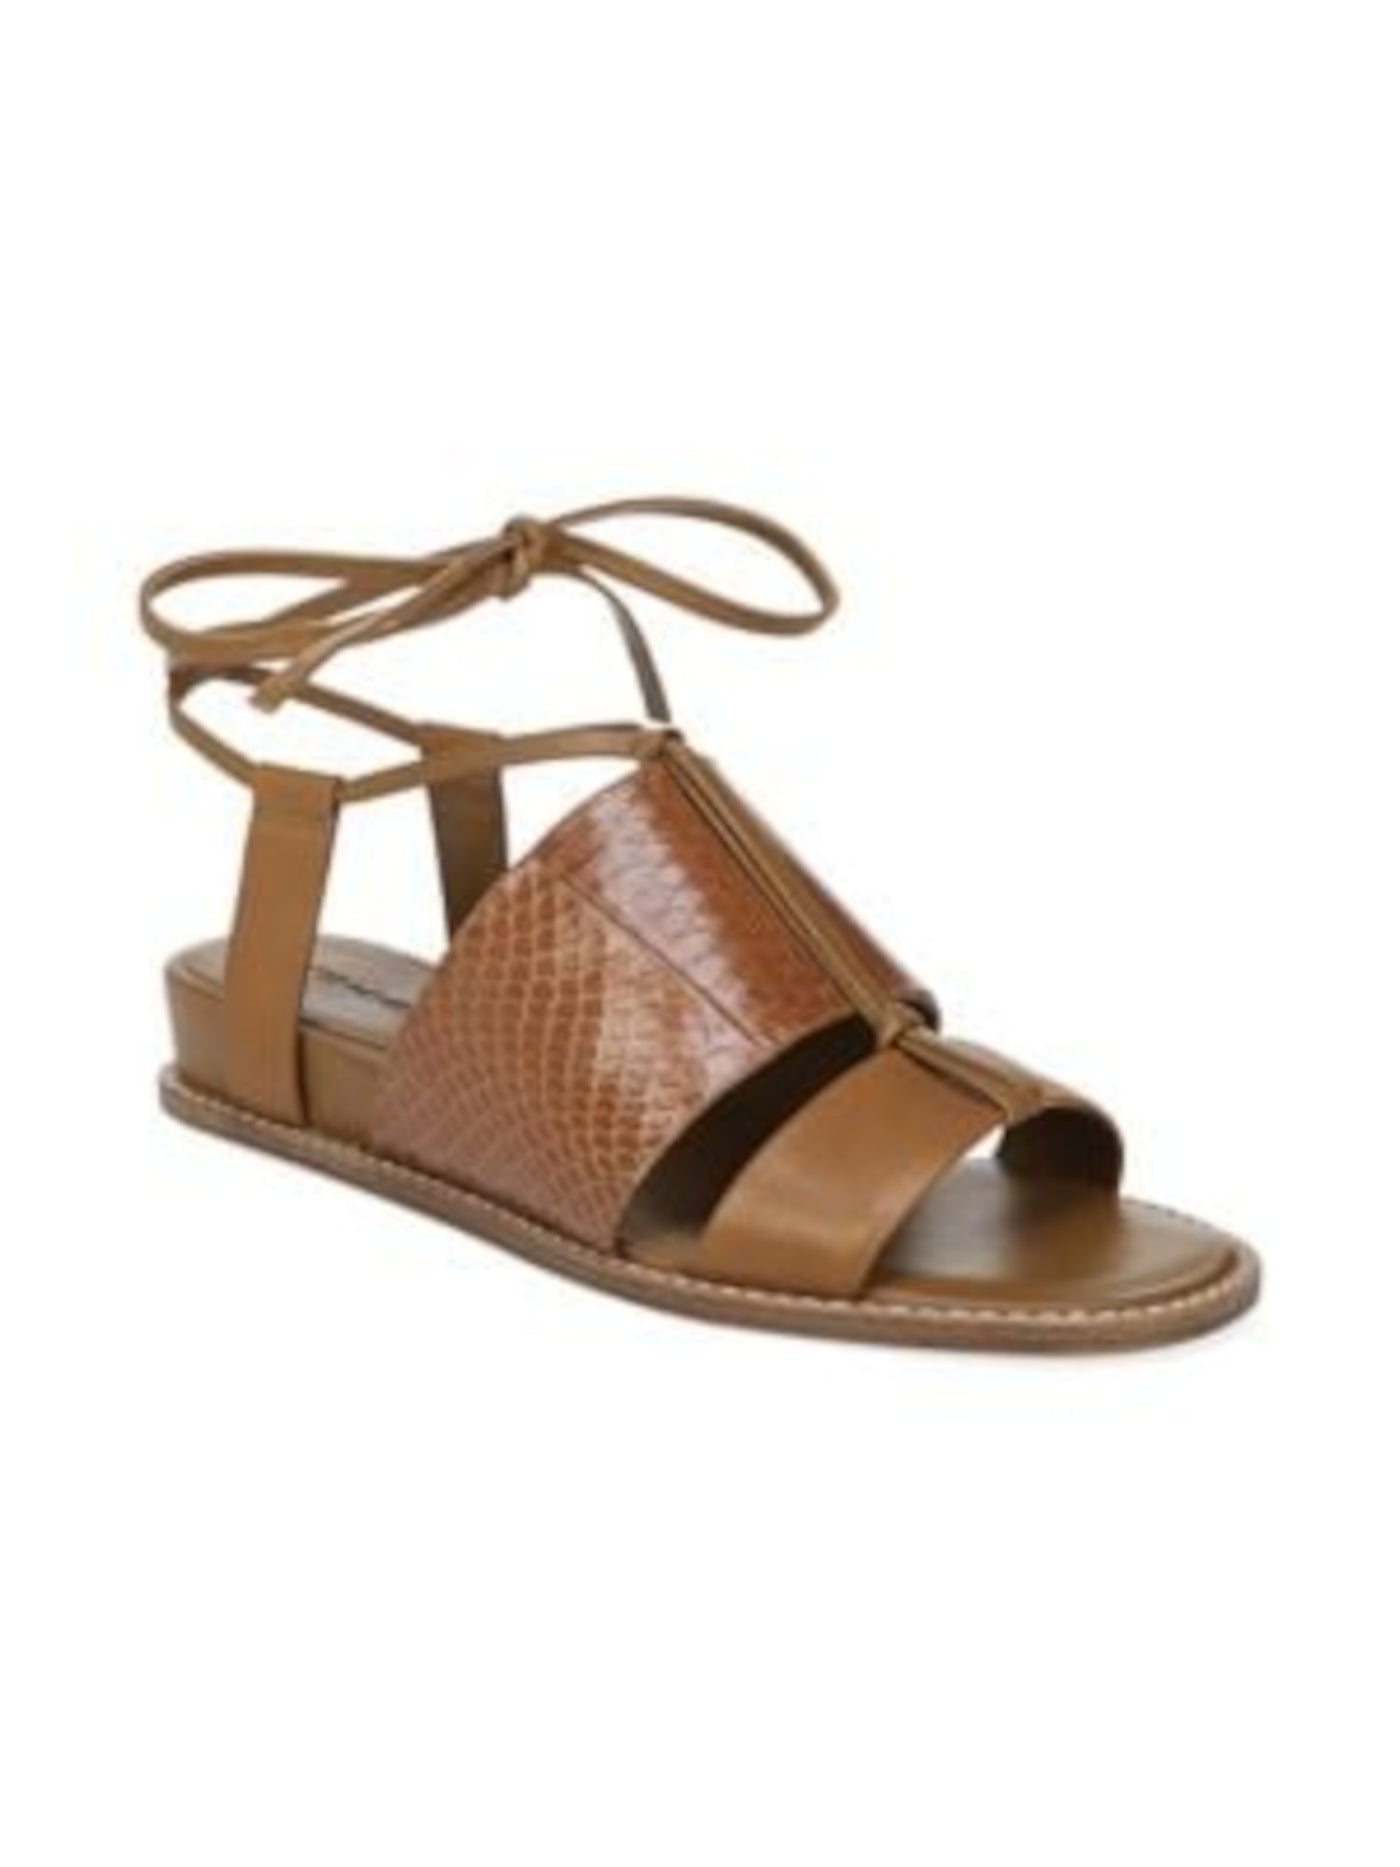 VINCE. Womens Brown Strappy Comfort Forster Round Toe Wedge Lace-Up Leather Slingback Sandal 8.5 M